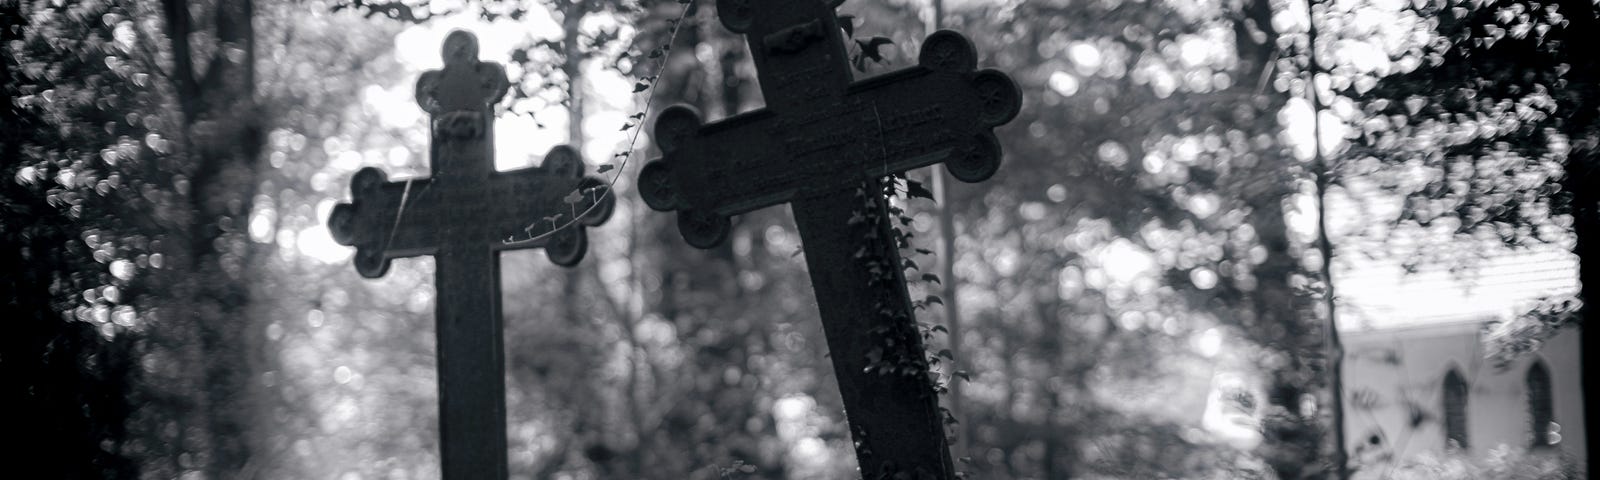 Black and white photo showing two crosses in an overgrown graveyard with trees in the background